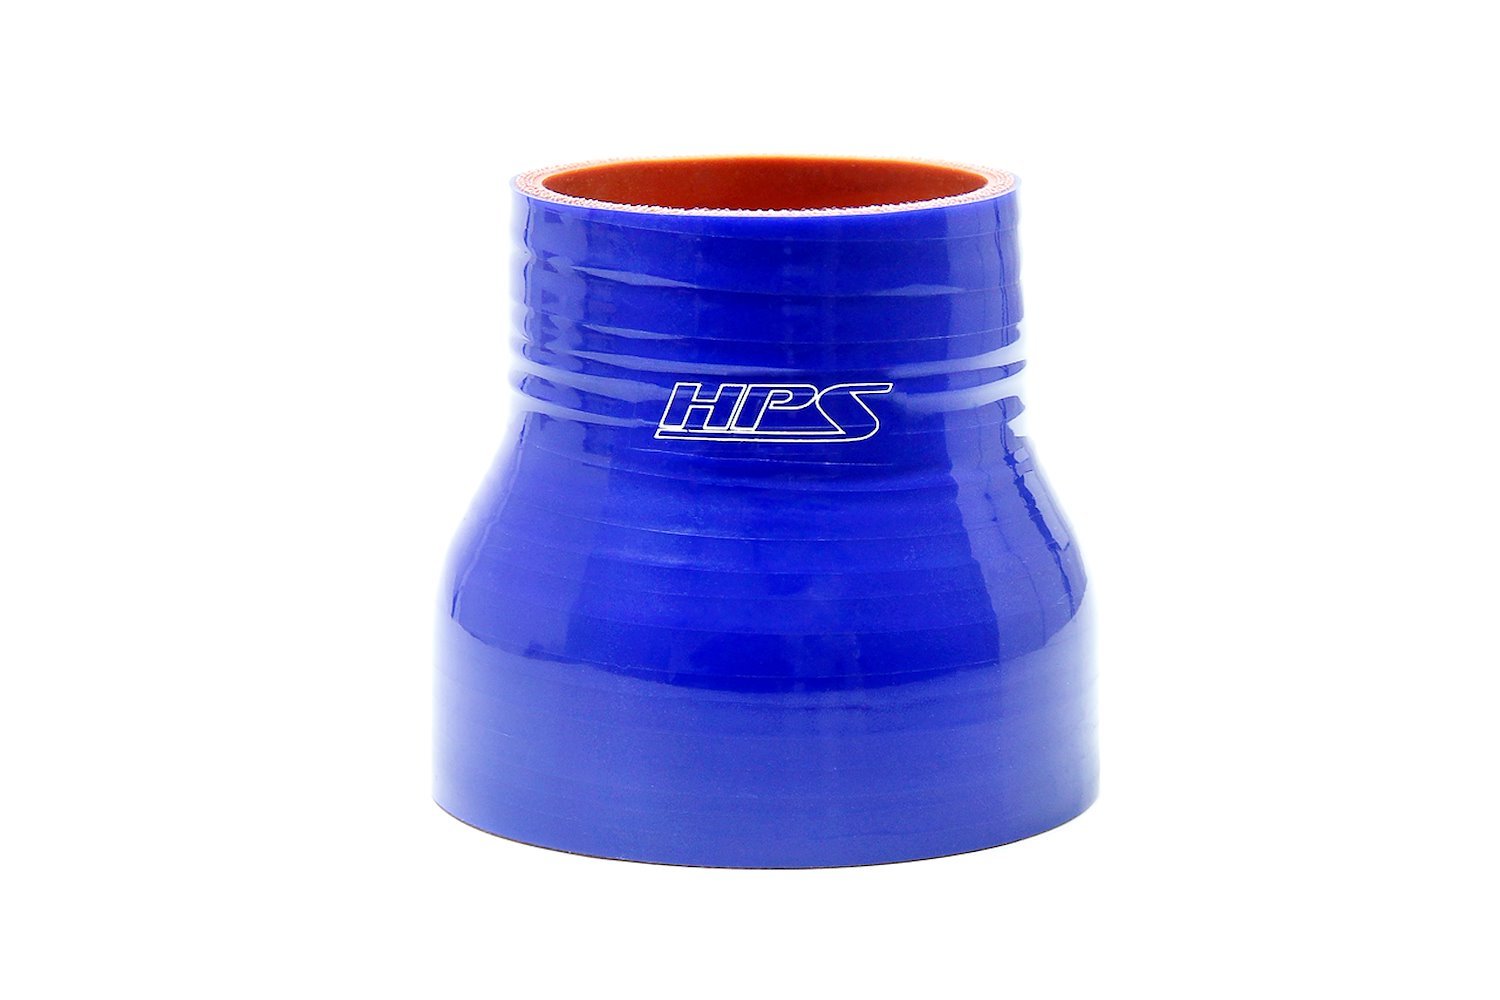 HTSR-187-212-BLUE Silicone Reducer Hose, High-Temp 4-Ply Reinforced, 1-7/8 in. - 2-1/8 in. ID, 3 in. Long, Blue